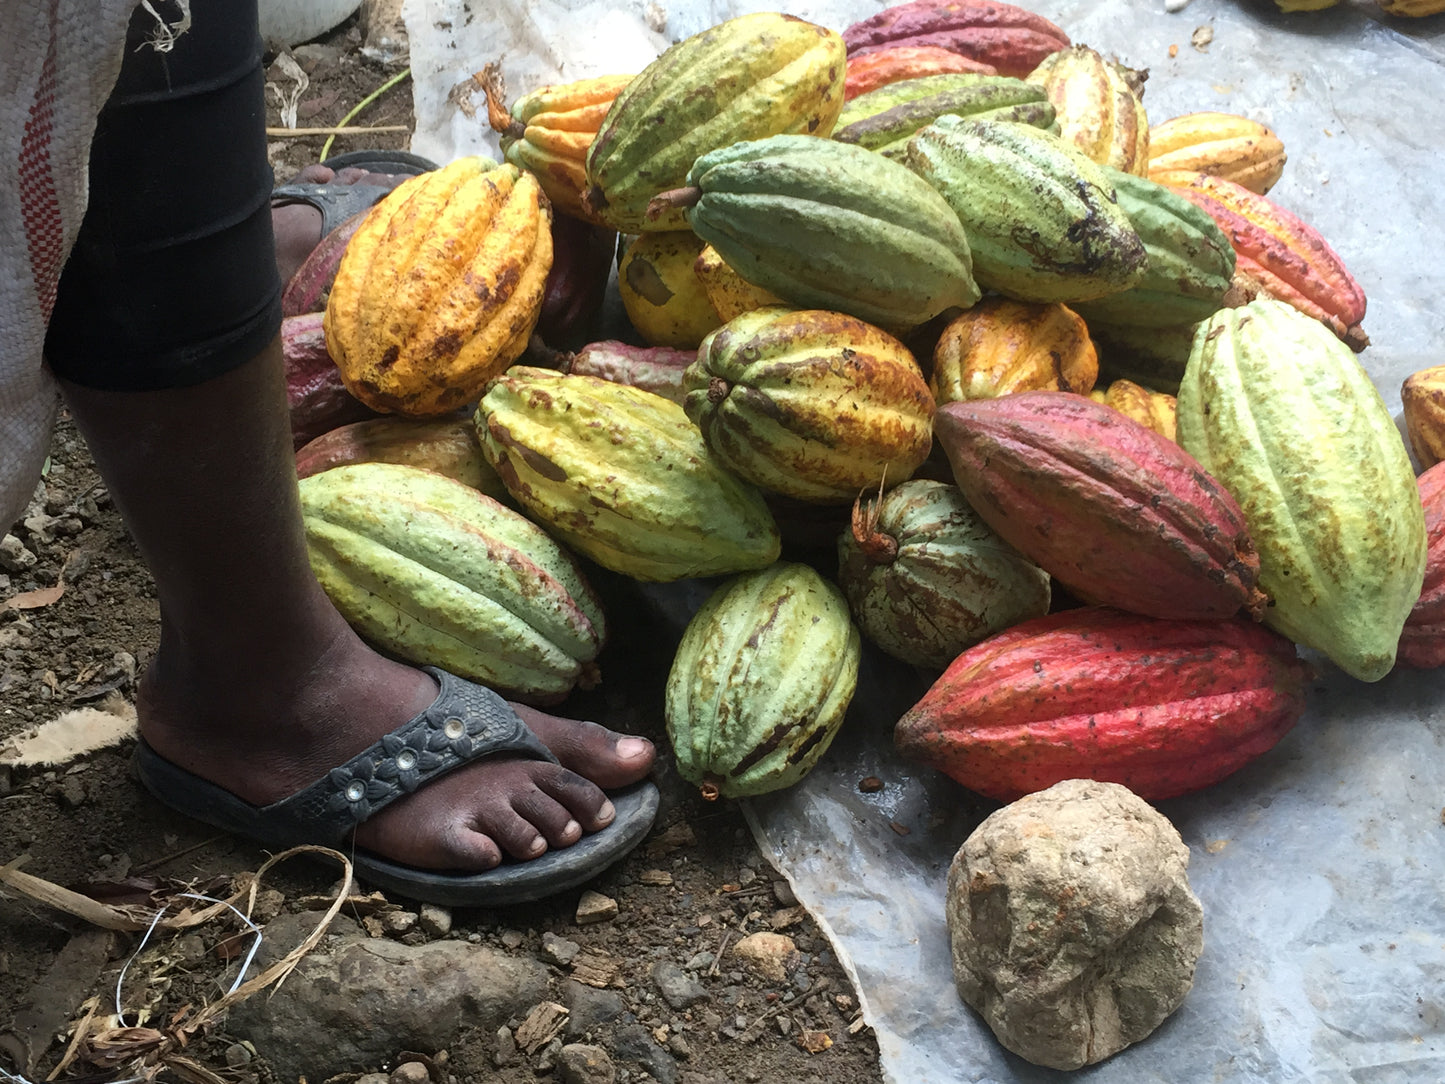 Planting and harvesting cacao beans in Haiti